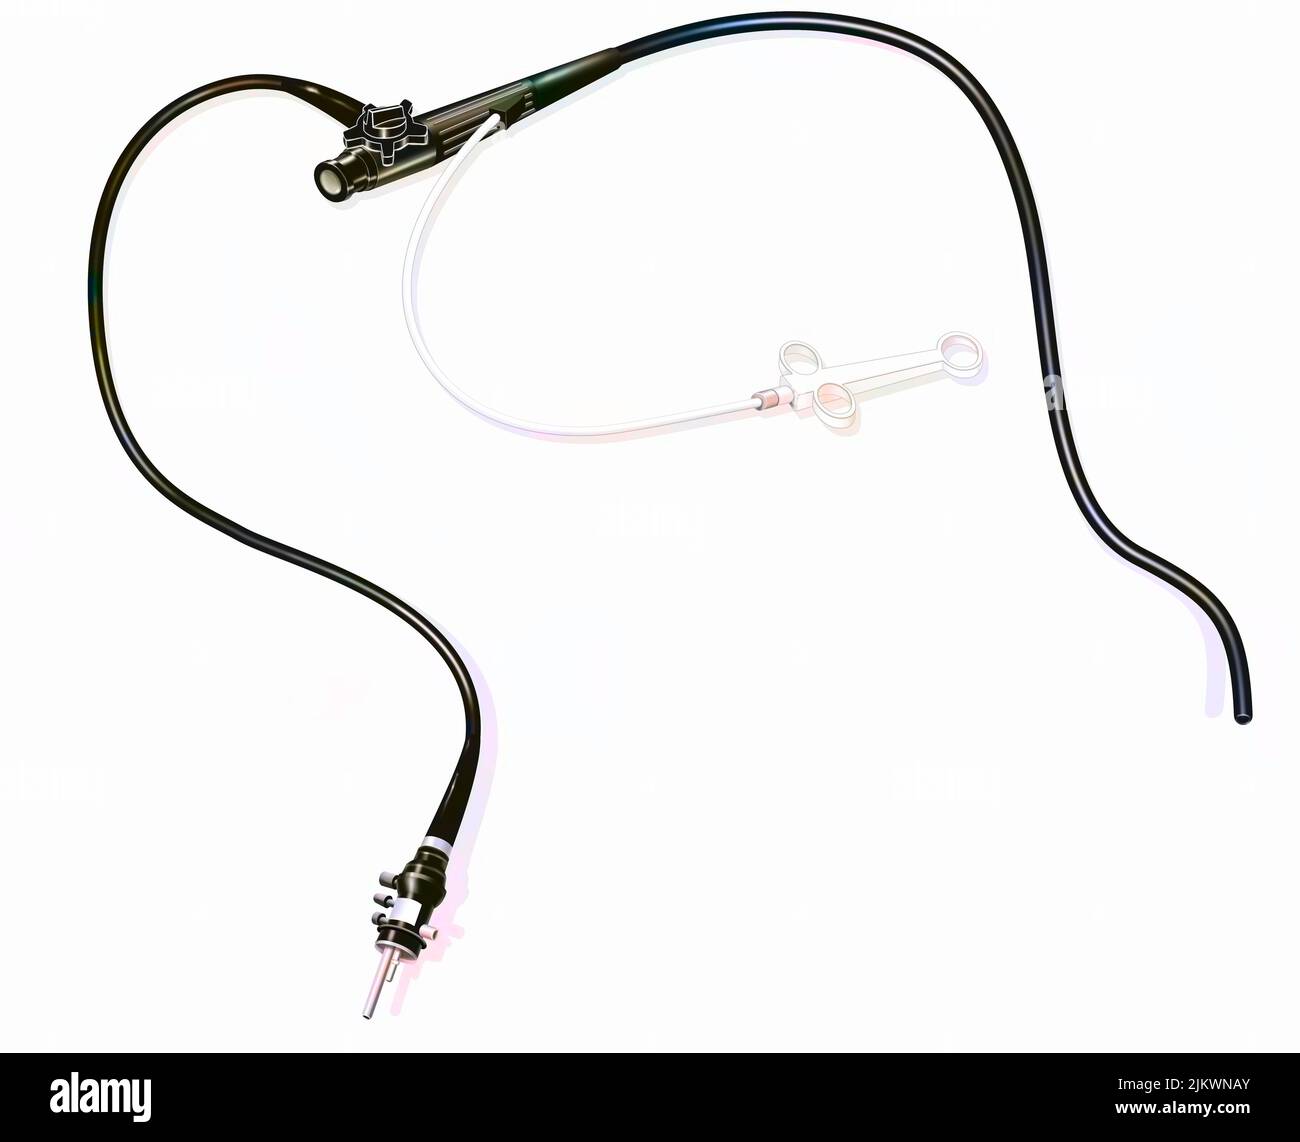 Gastroscope used in the medical examination of the stomach (gastroscopy). Stock Photo